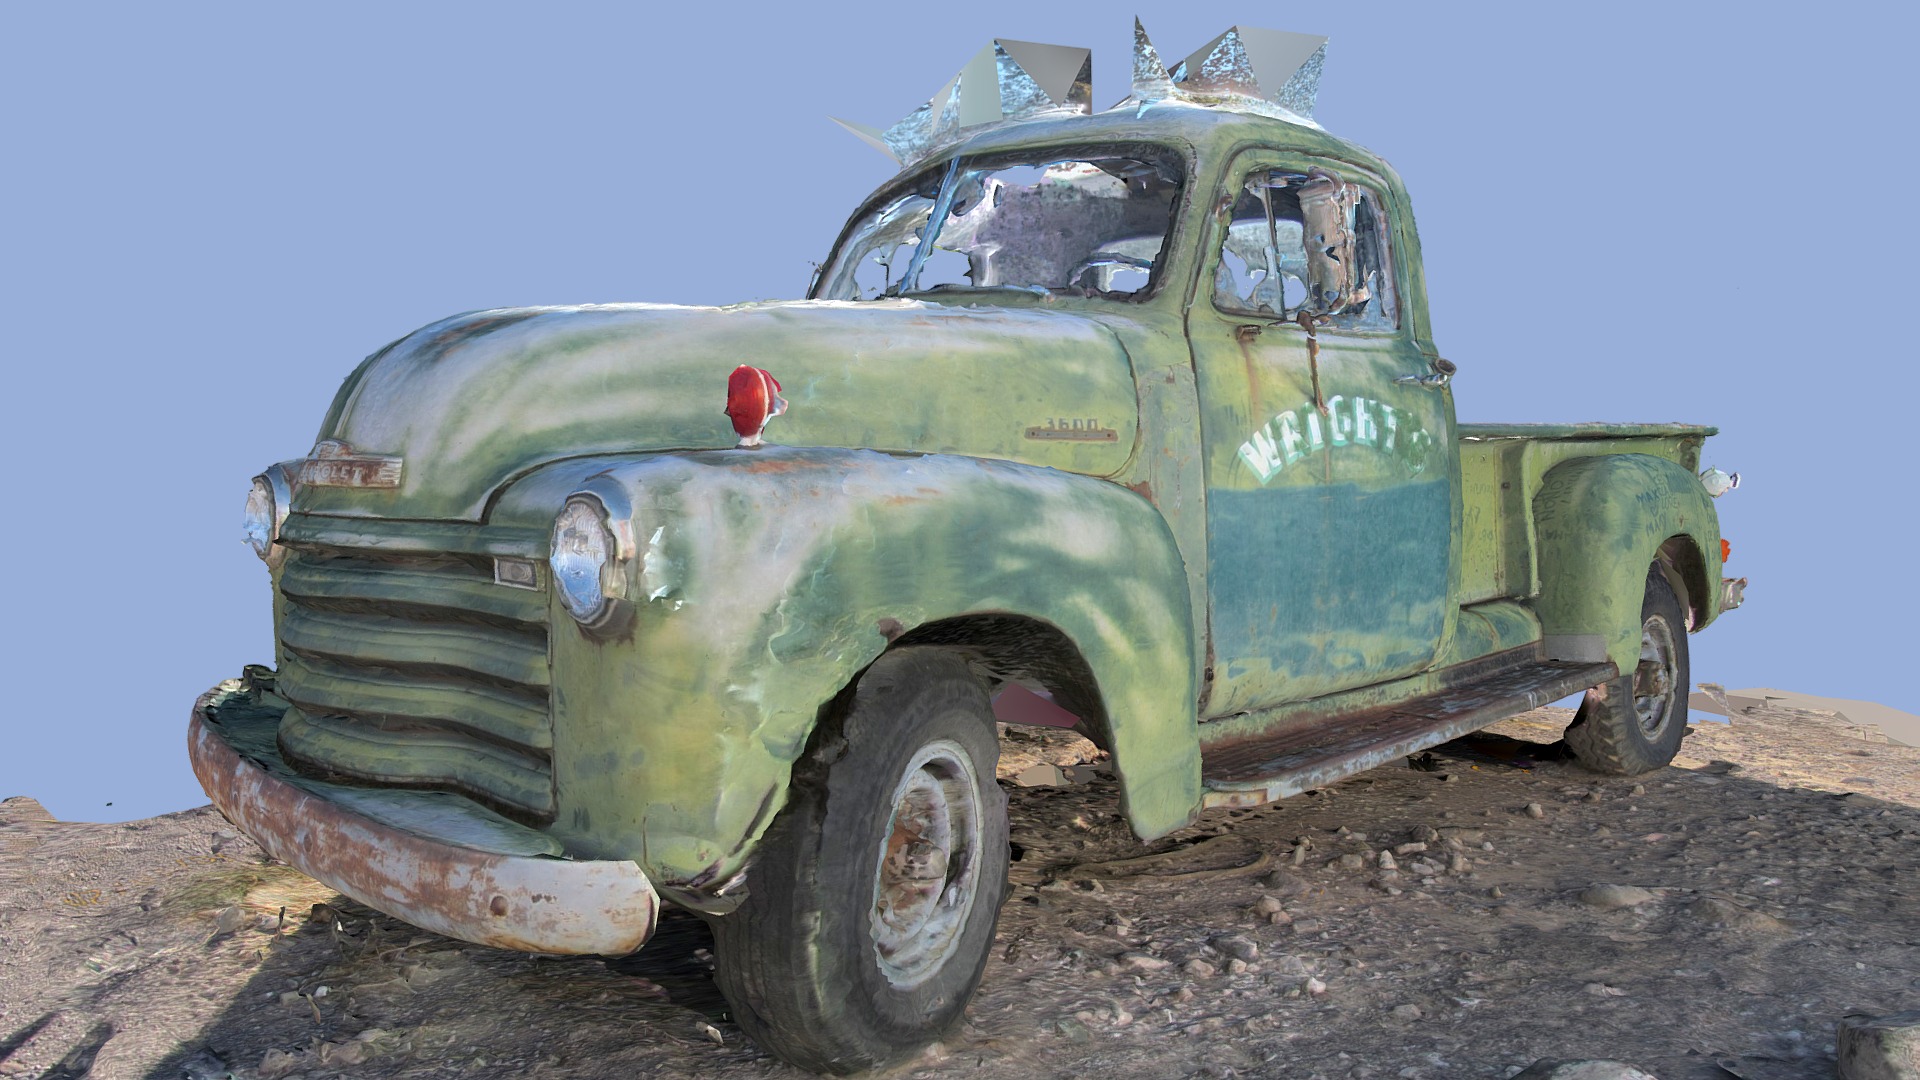 3D model Green Truck - This is a 3D model of the Green Truck. The 3D model is about a green truck parked on a dirt road.